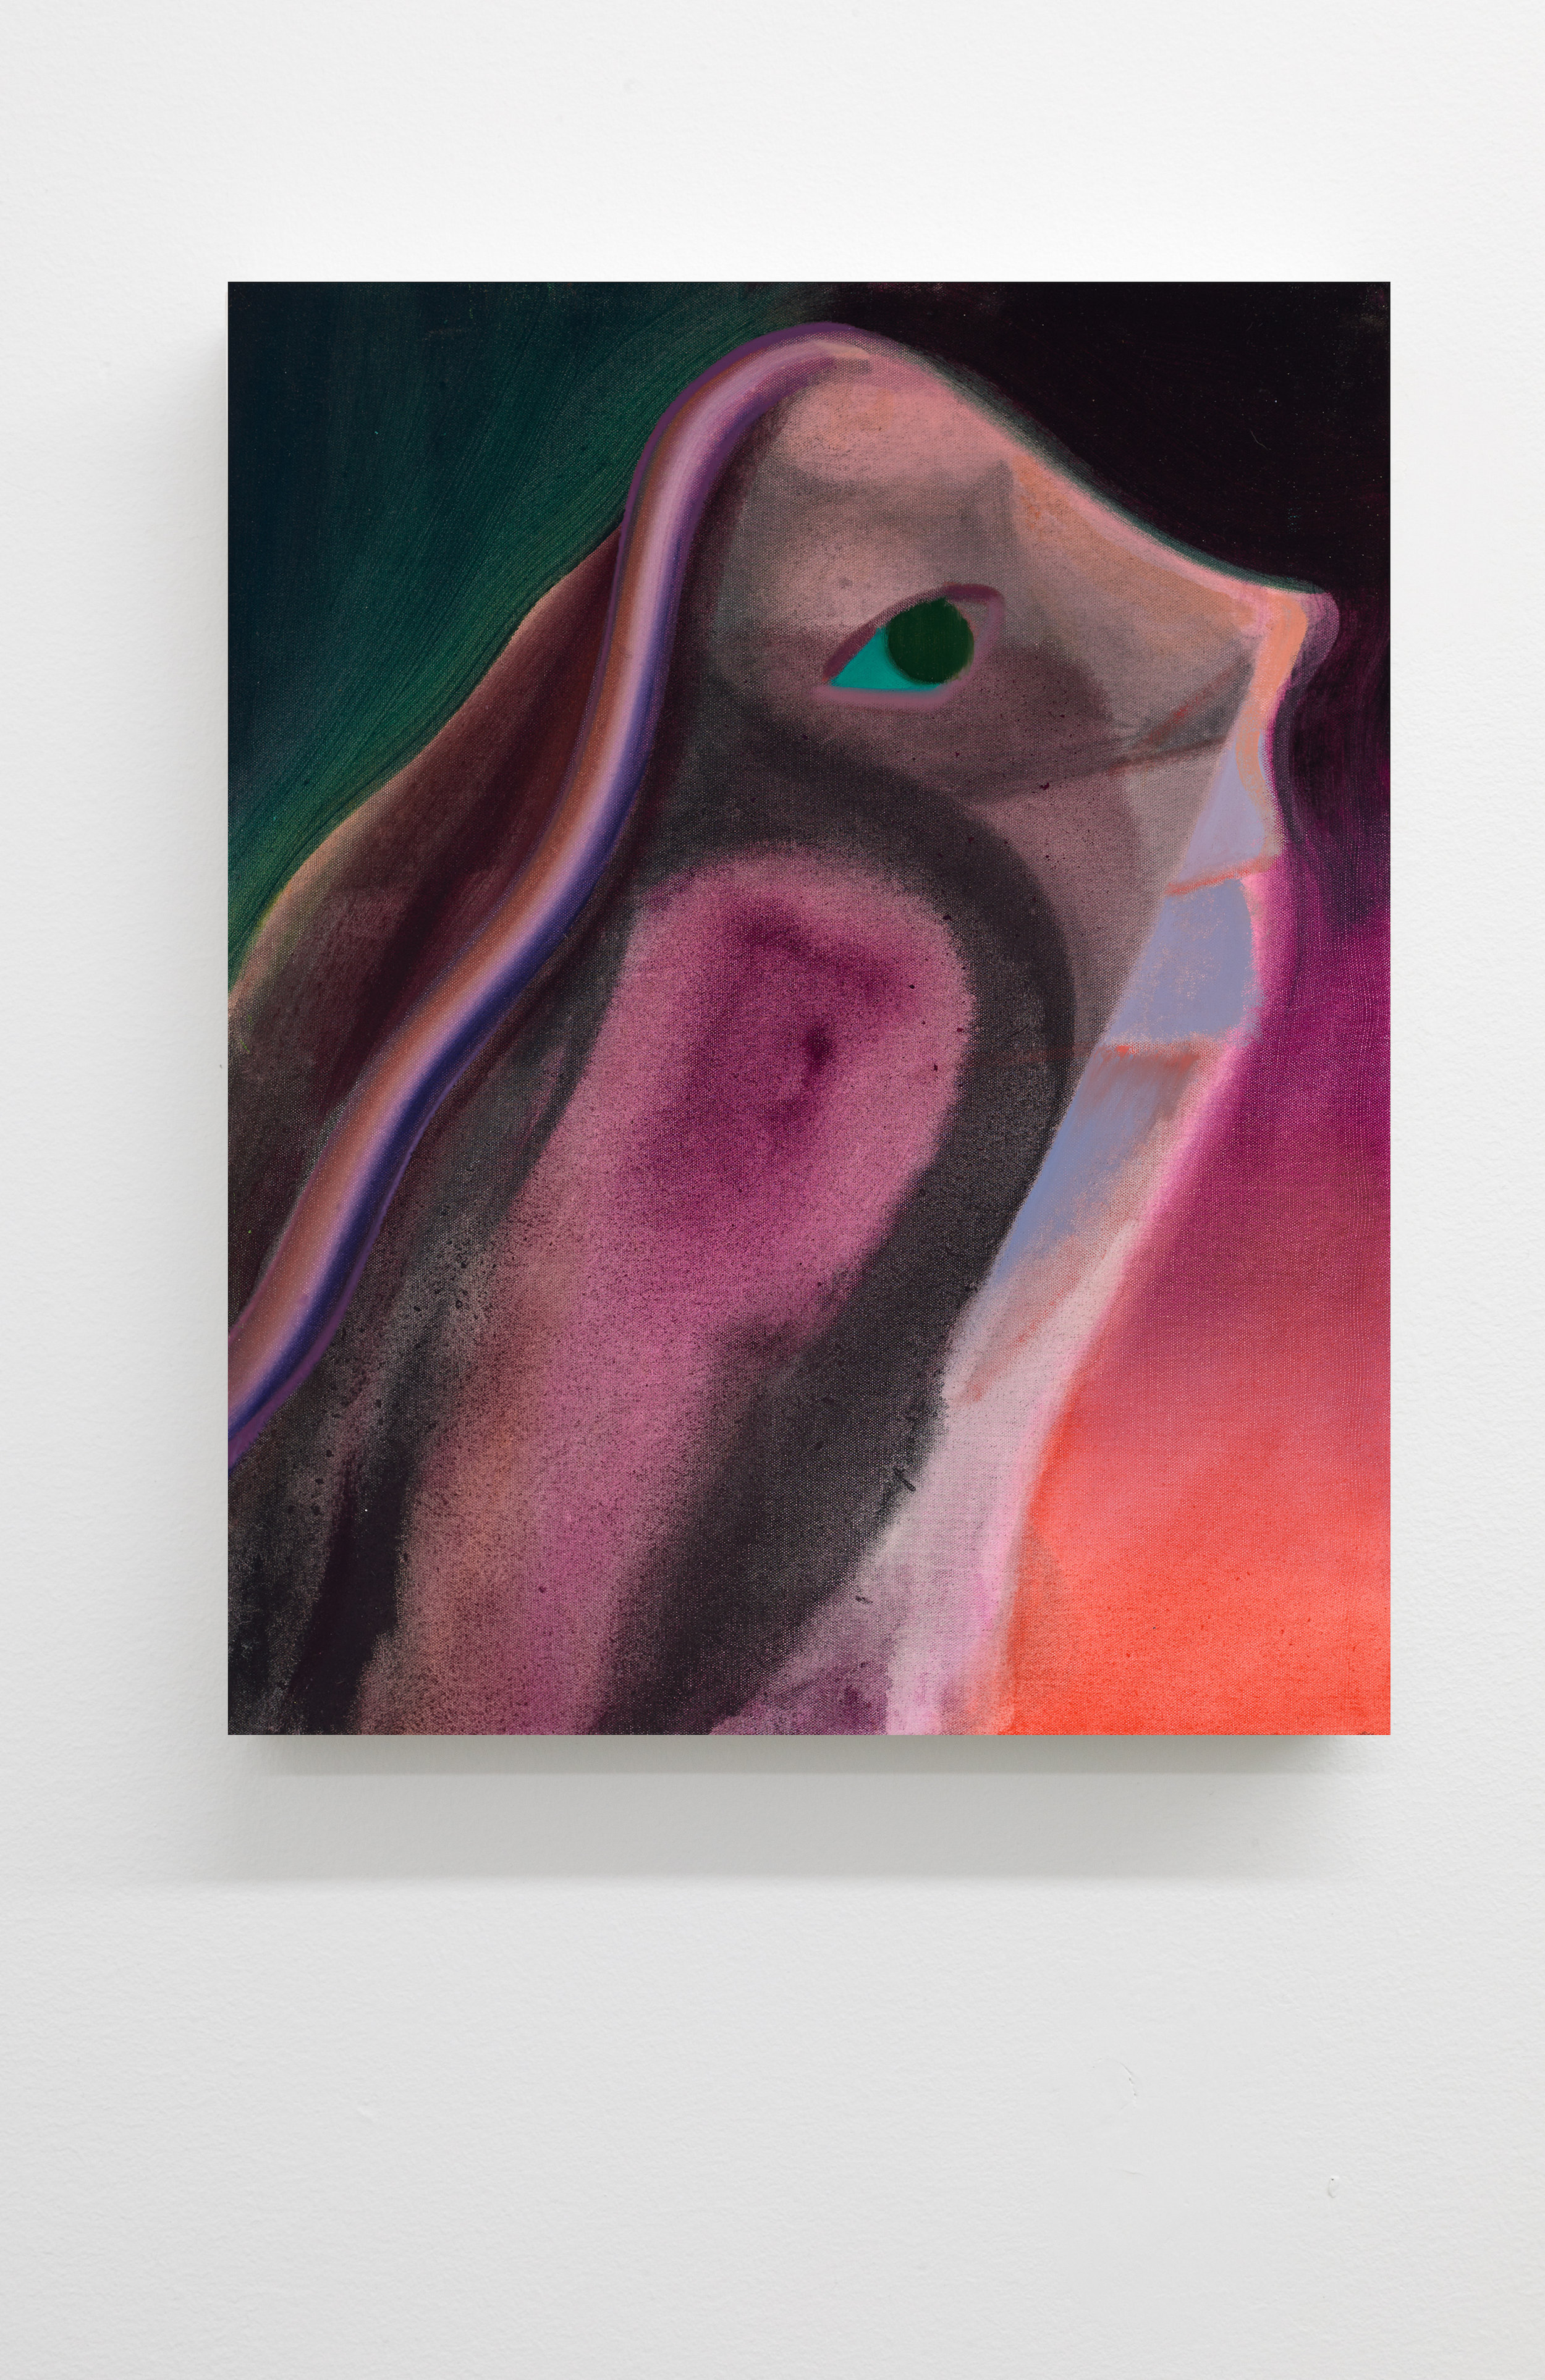  Anders Oinonen,  Untitled , 2019, Oil on canvas, 30 x 24 in 